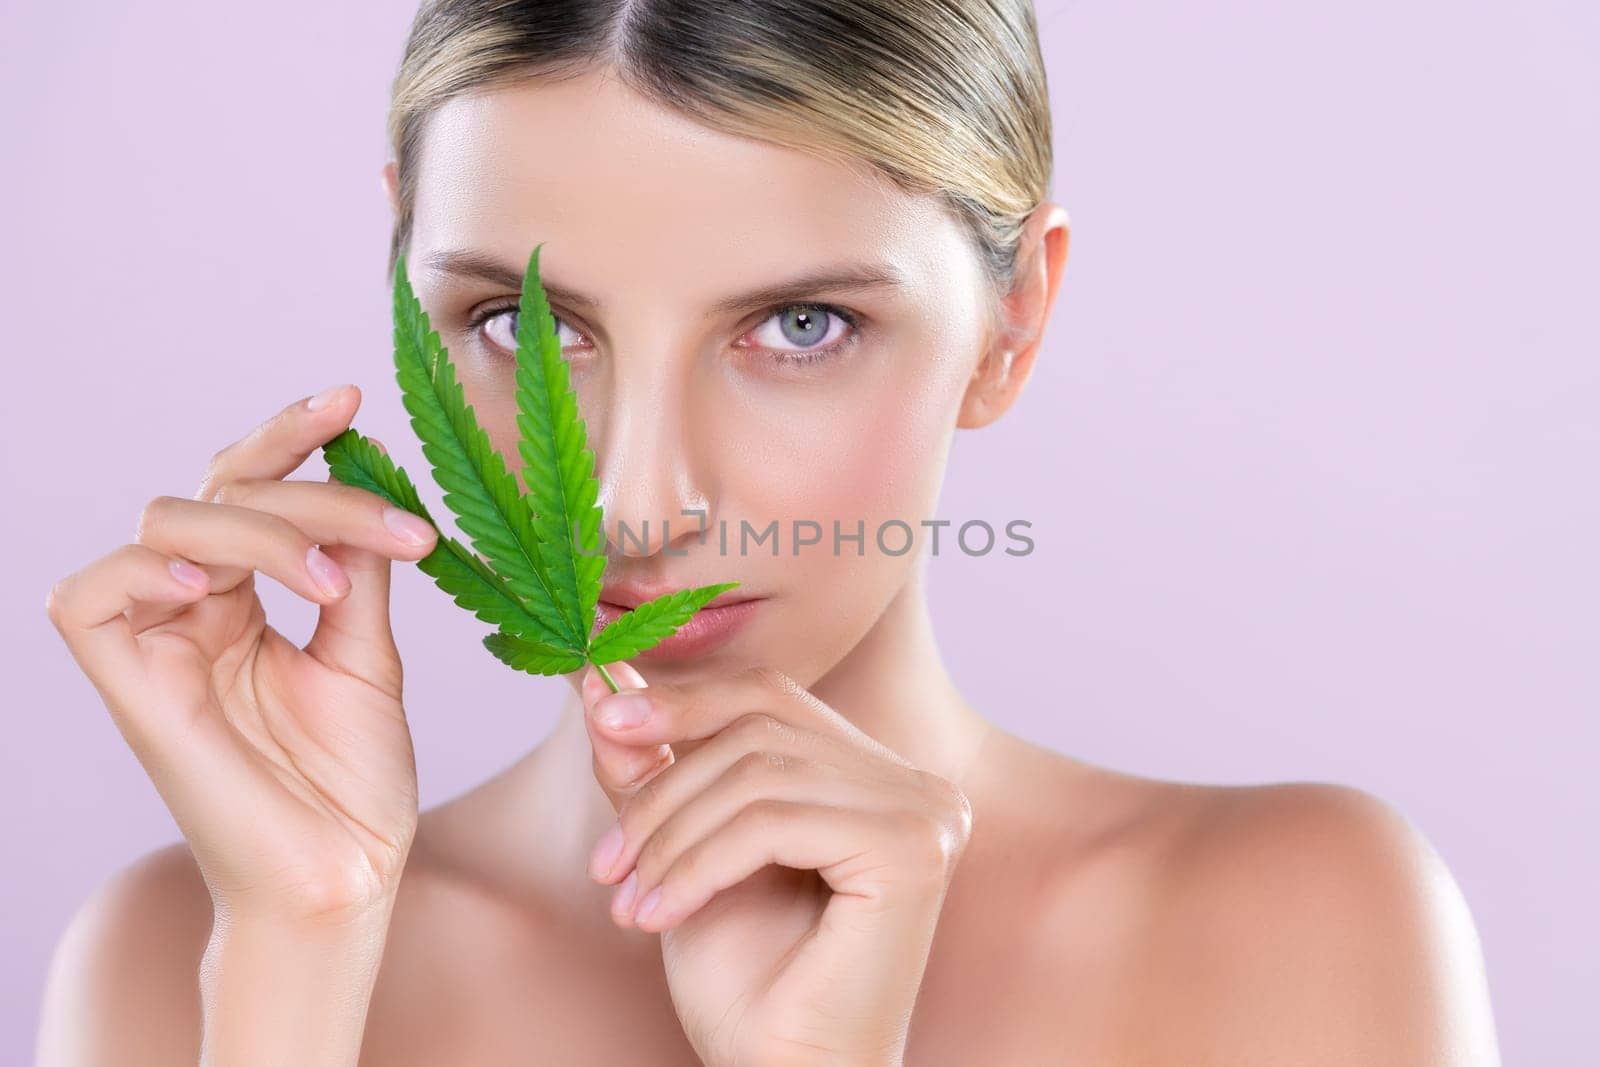 Closeup alluring beautiful woman model portrait holding green leaf as concept for cannabis skincare cosmetic product for perfect skin freshness treatment in isolated pink background.